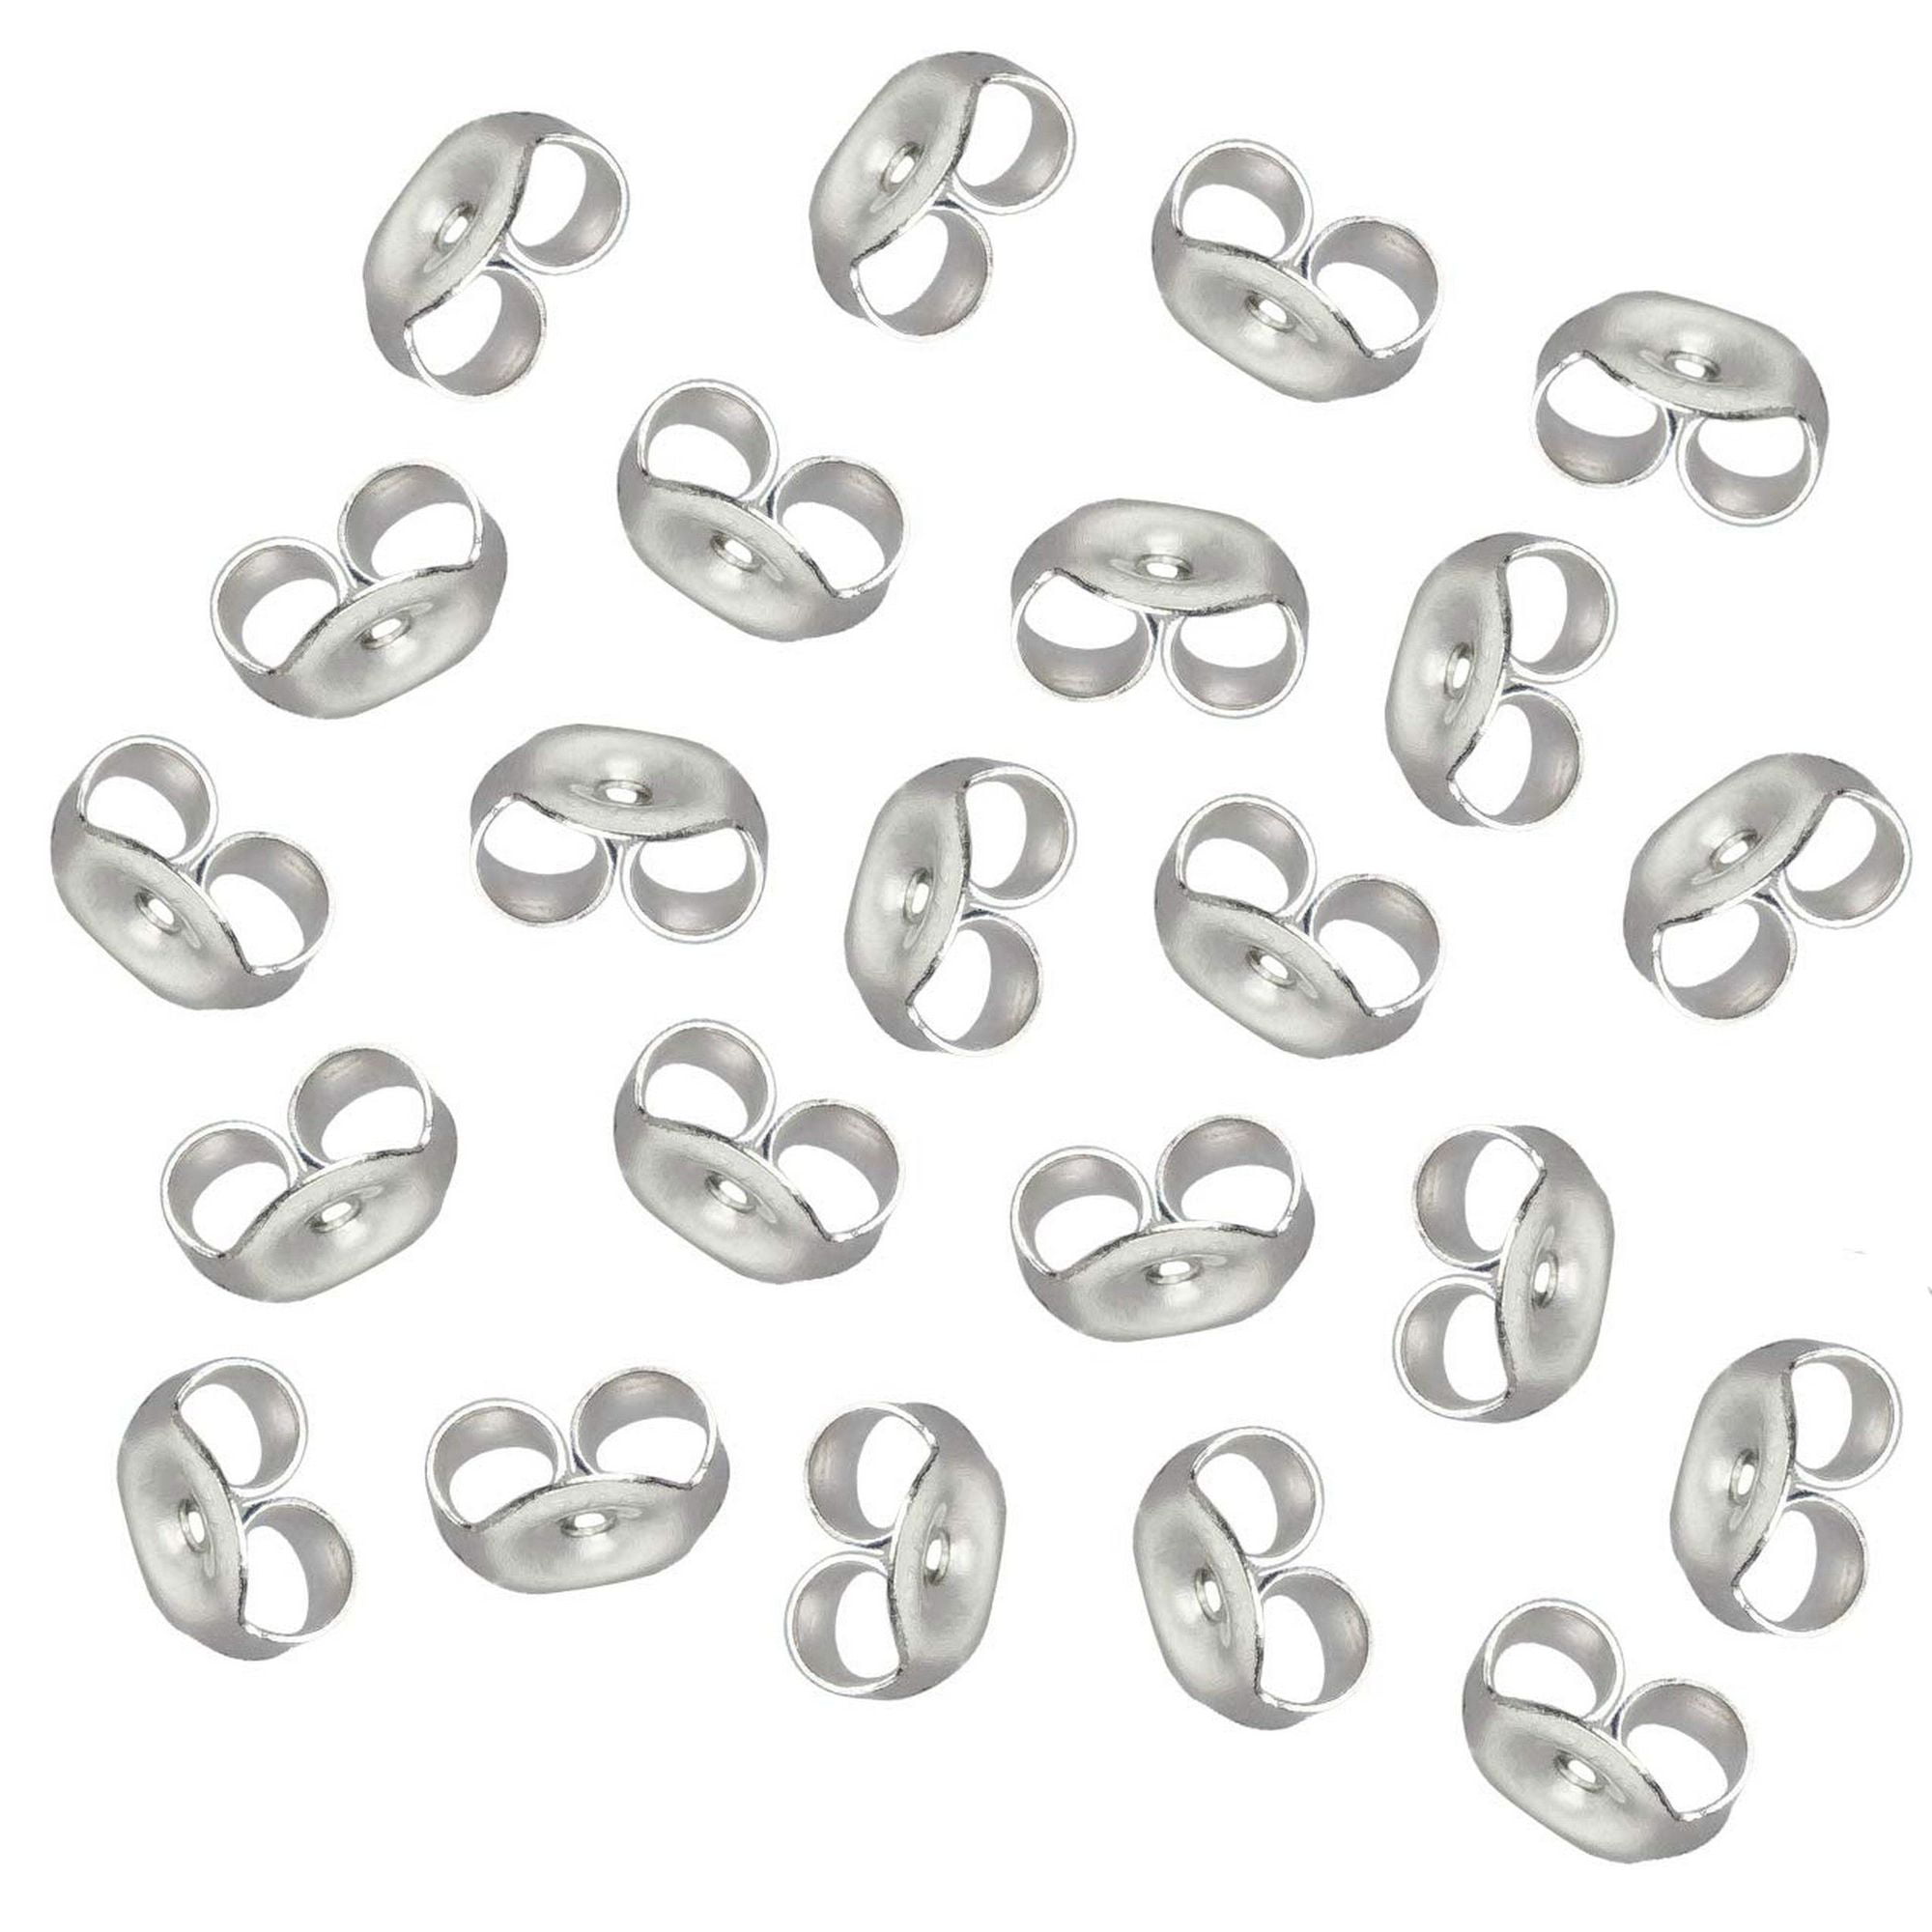 8 Gold 8 Silver AIEX 16Pcs 8 Pairs Earring Backs 925 Sterling Silver 14K Gold Sensitive Ears Secure Locking Replacement Secure Ear Backing for Stud Earrings Jewelry Making Women Hypoallergenic